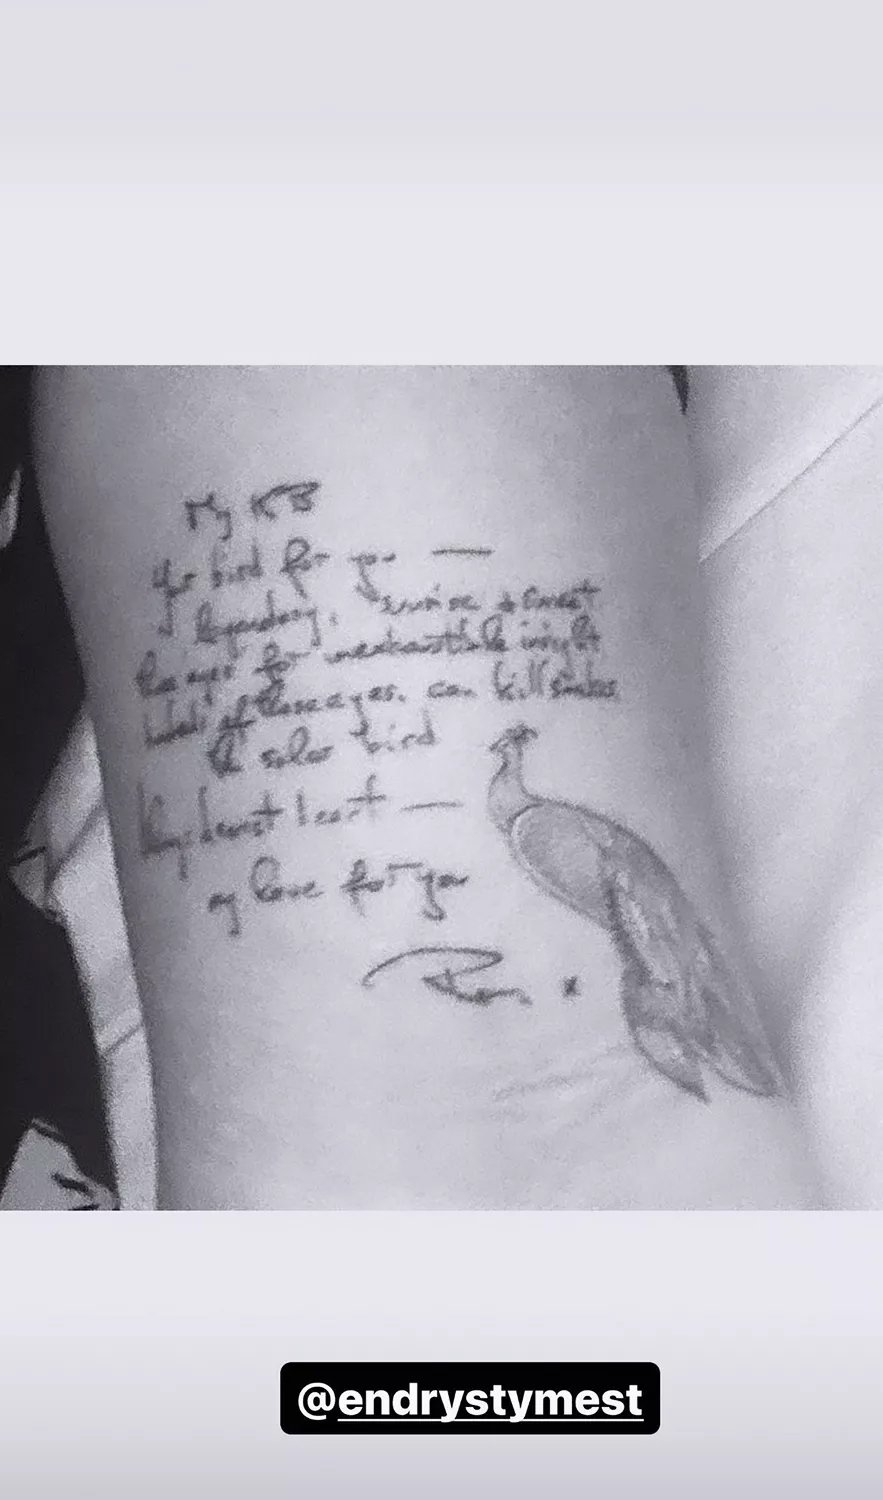 Kate Beckinsale tattoo. Handwritten message from father with bird next to it.